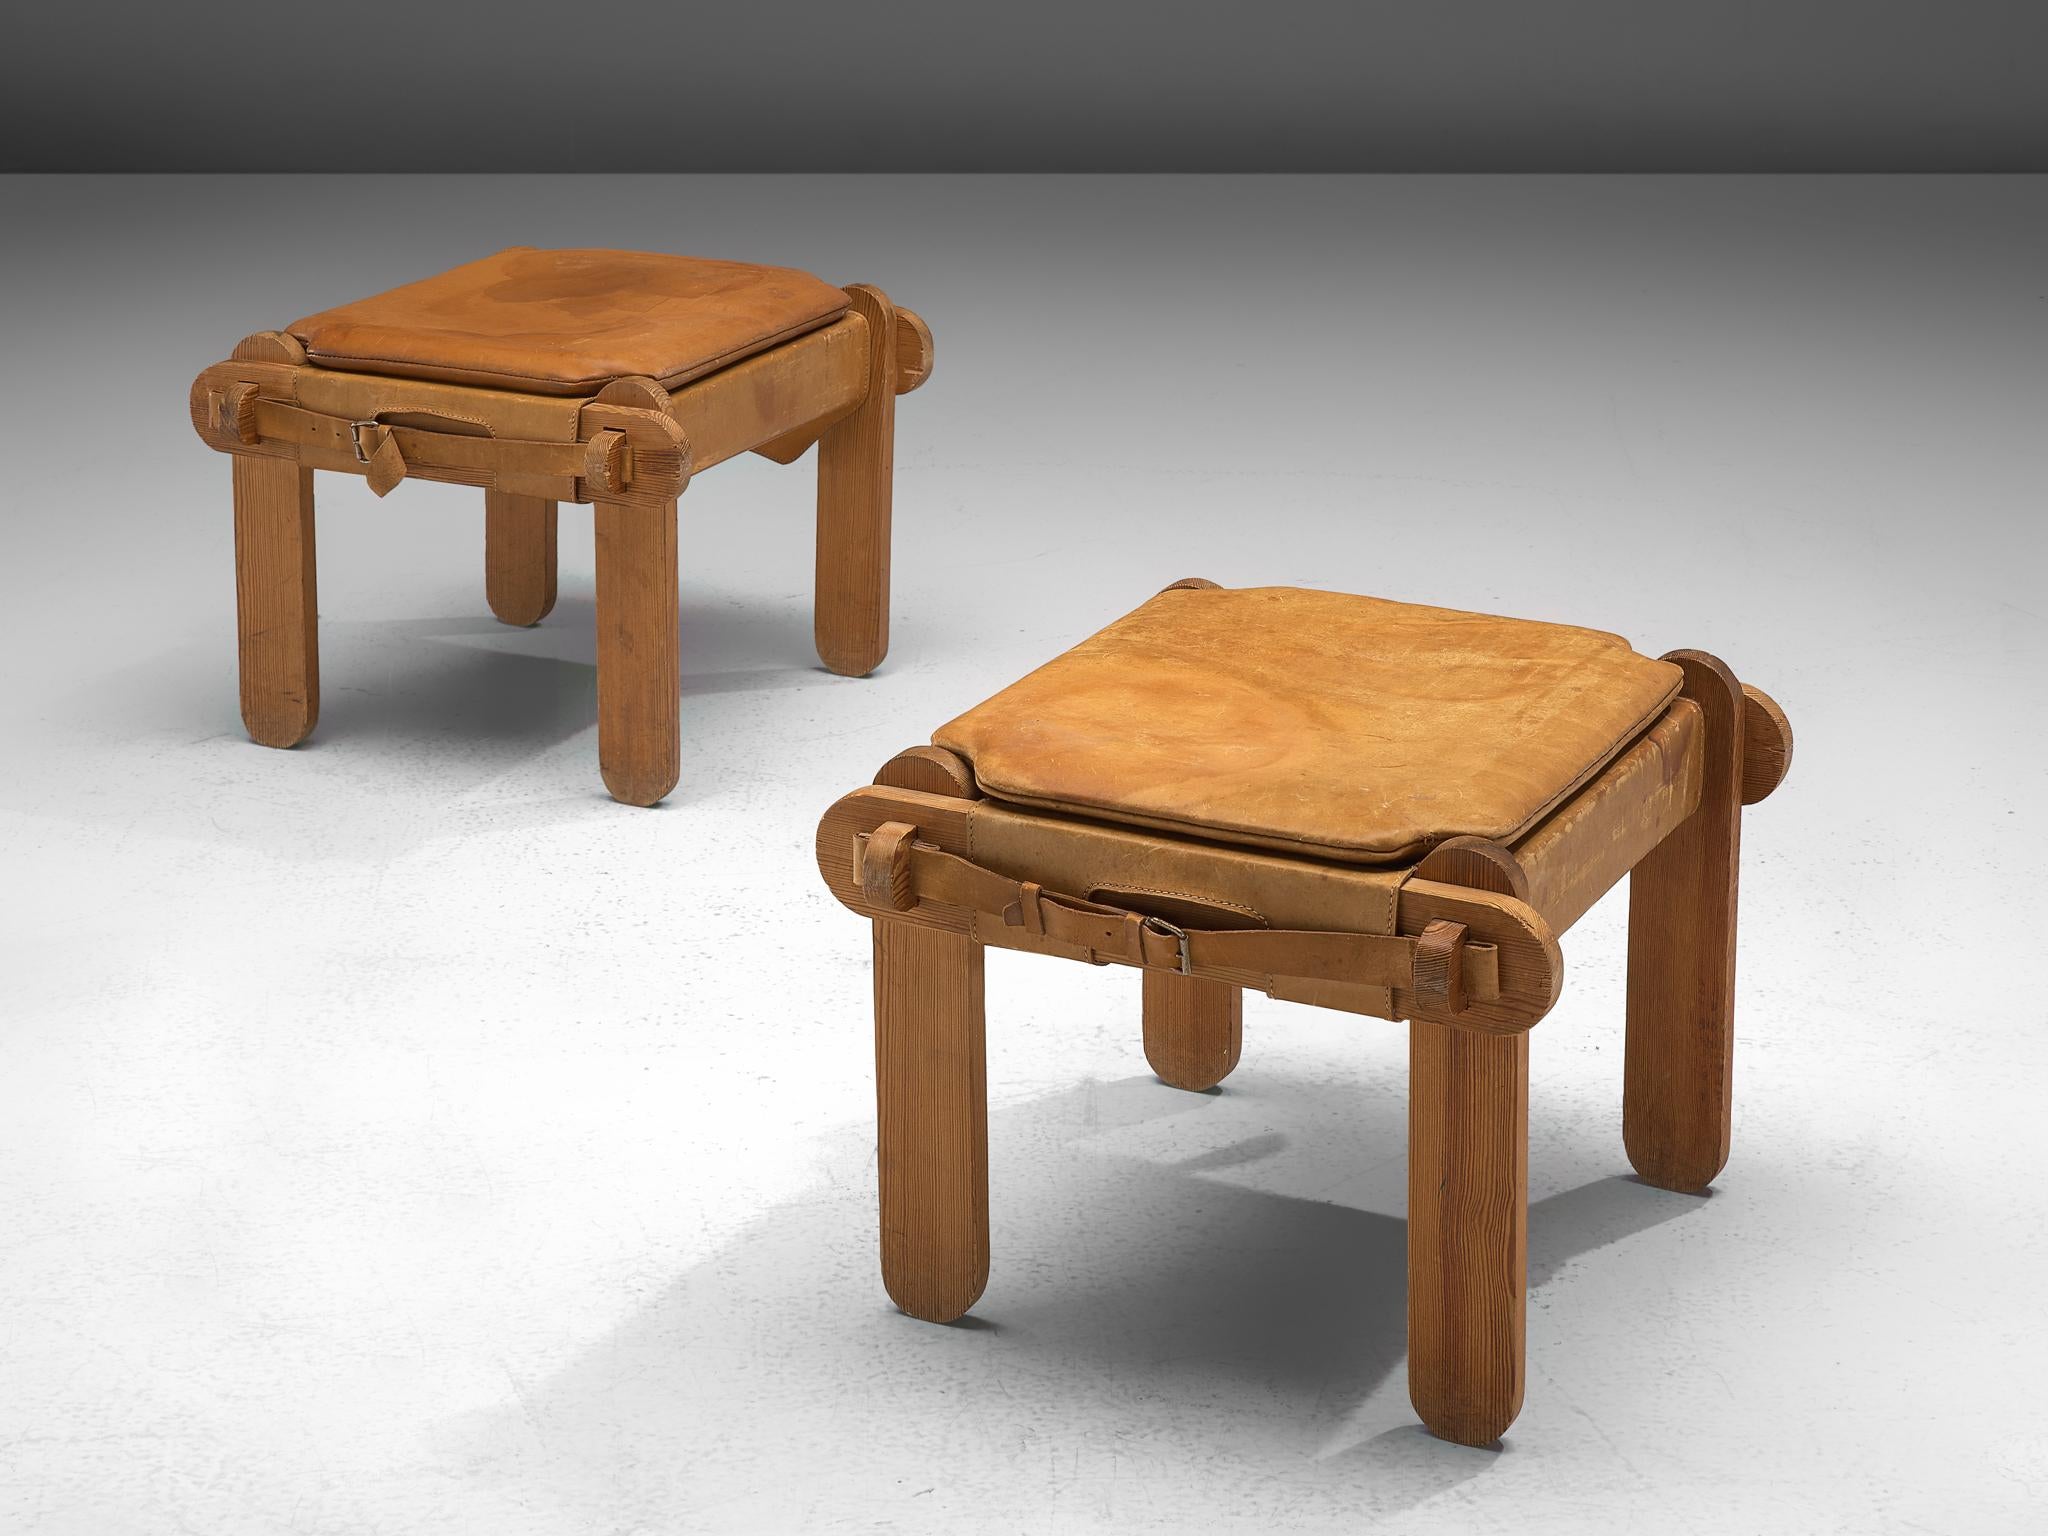 Pair of ottomans, leather, pine, France, 1950s.

This pair of low stools hold a solid crafted frame with characteristic wooden details/joints. The design is original and rare and features geometric, robust frame with rounded edges. The seat is